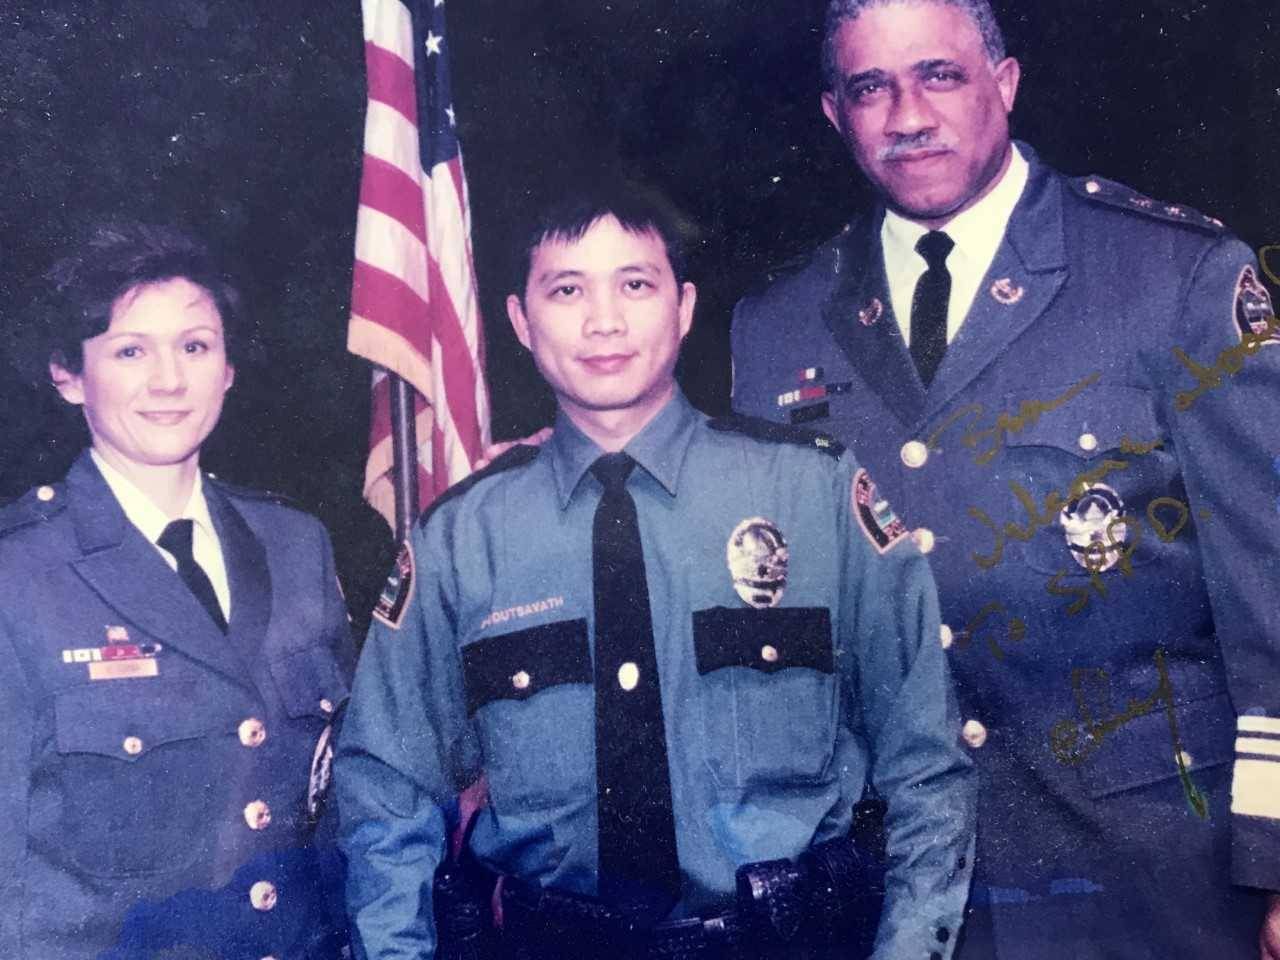 Ben Boutsavath in a police uniform, standing in front of an American flag with two other officers